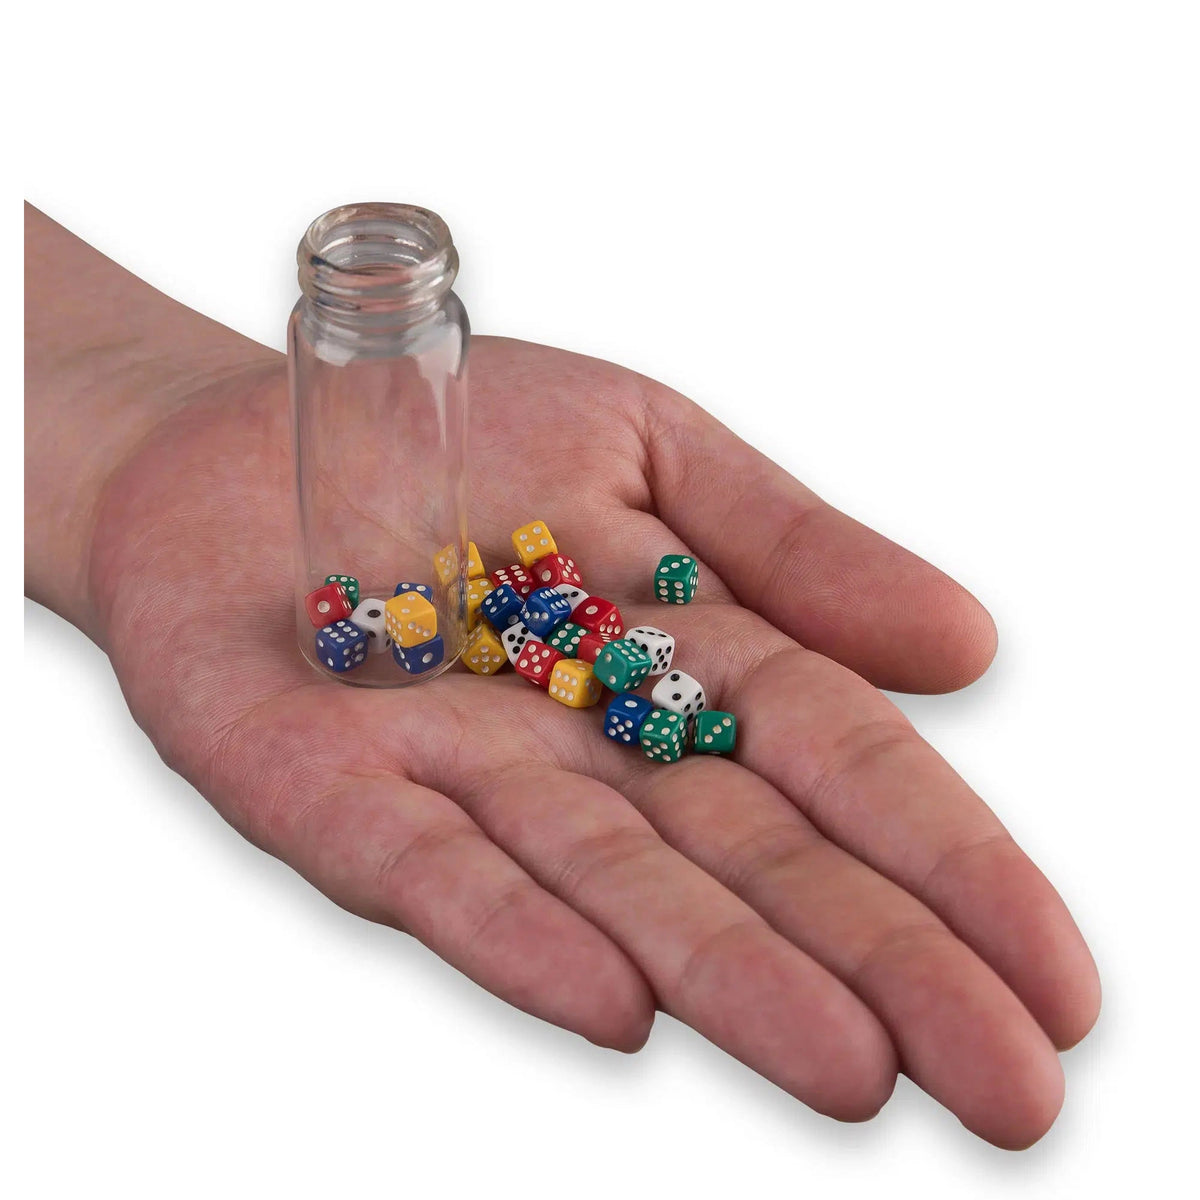 Front view of a person&#39;s hand holding and almost empty Pirate Dice Bottle-Game with the dice in their hand.